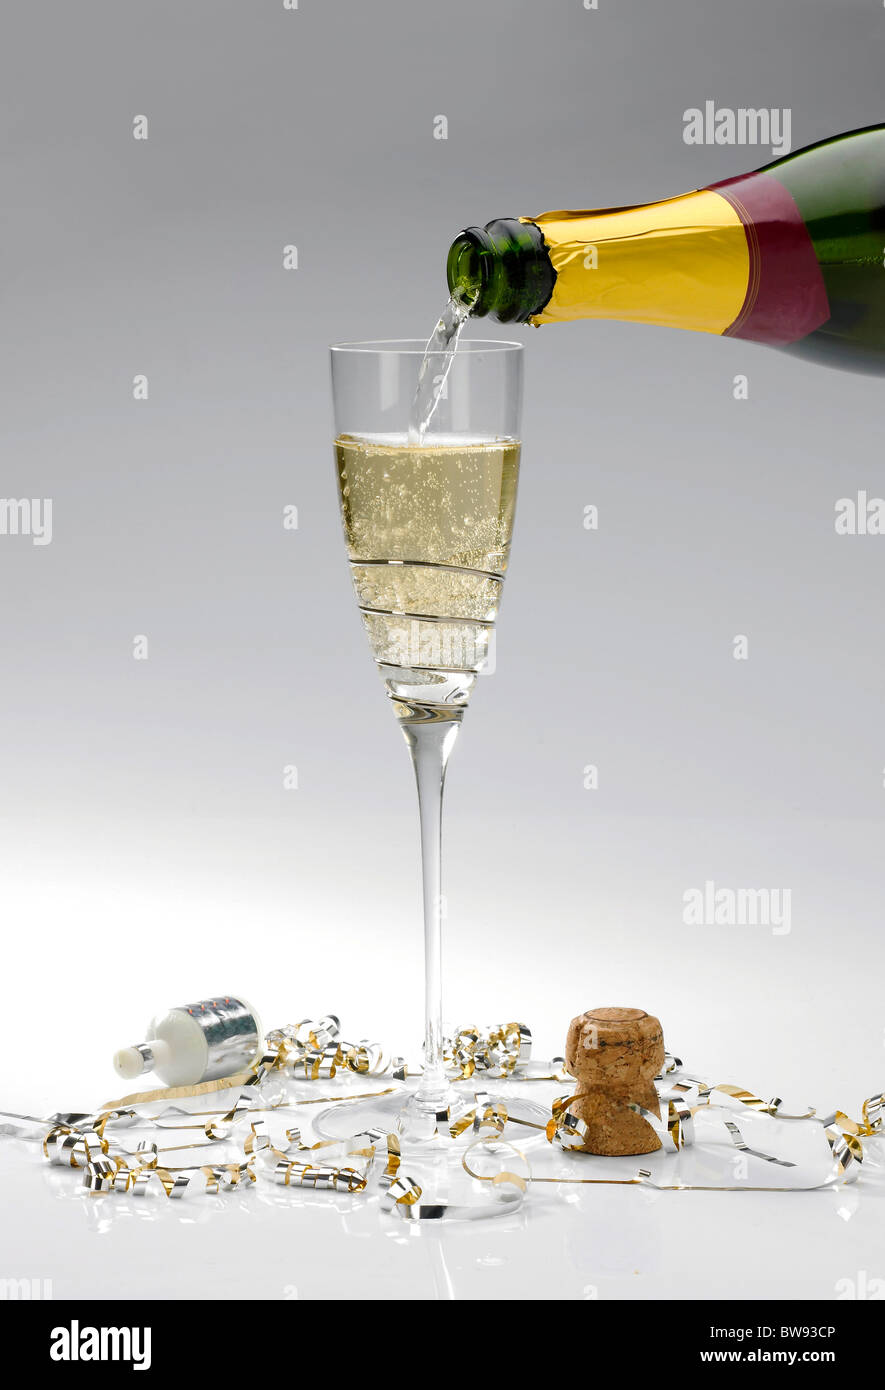 A single glass of champagne being poured from a bottle on a white background with popper and streamers Stock Photo